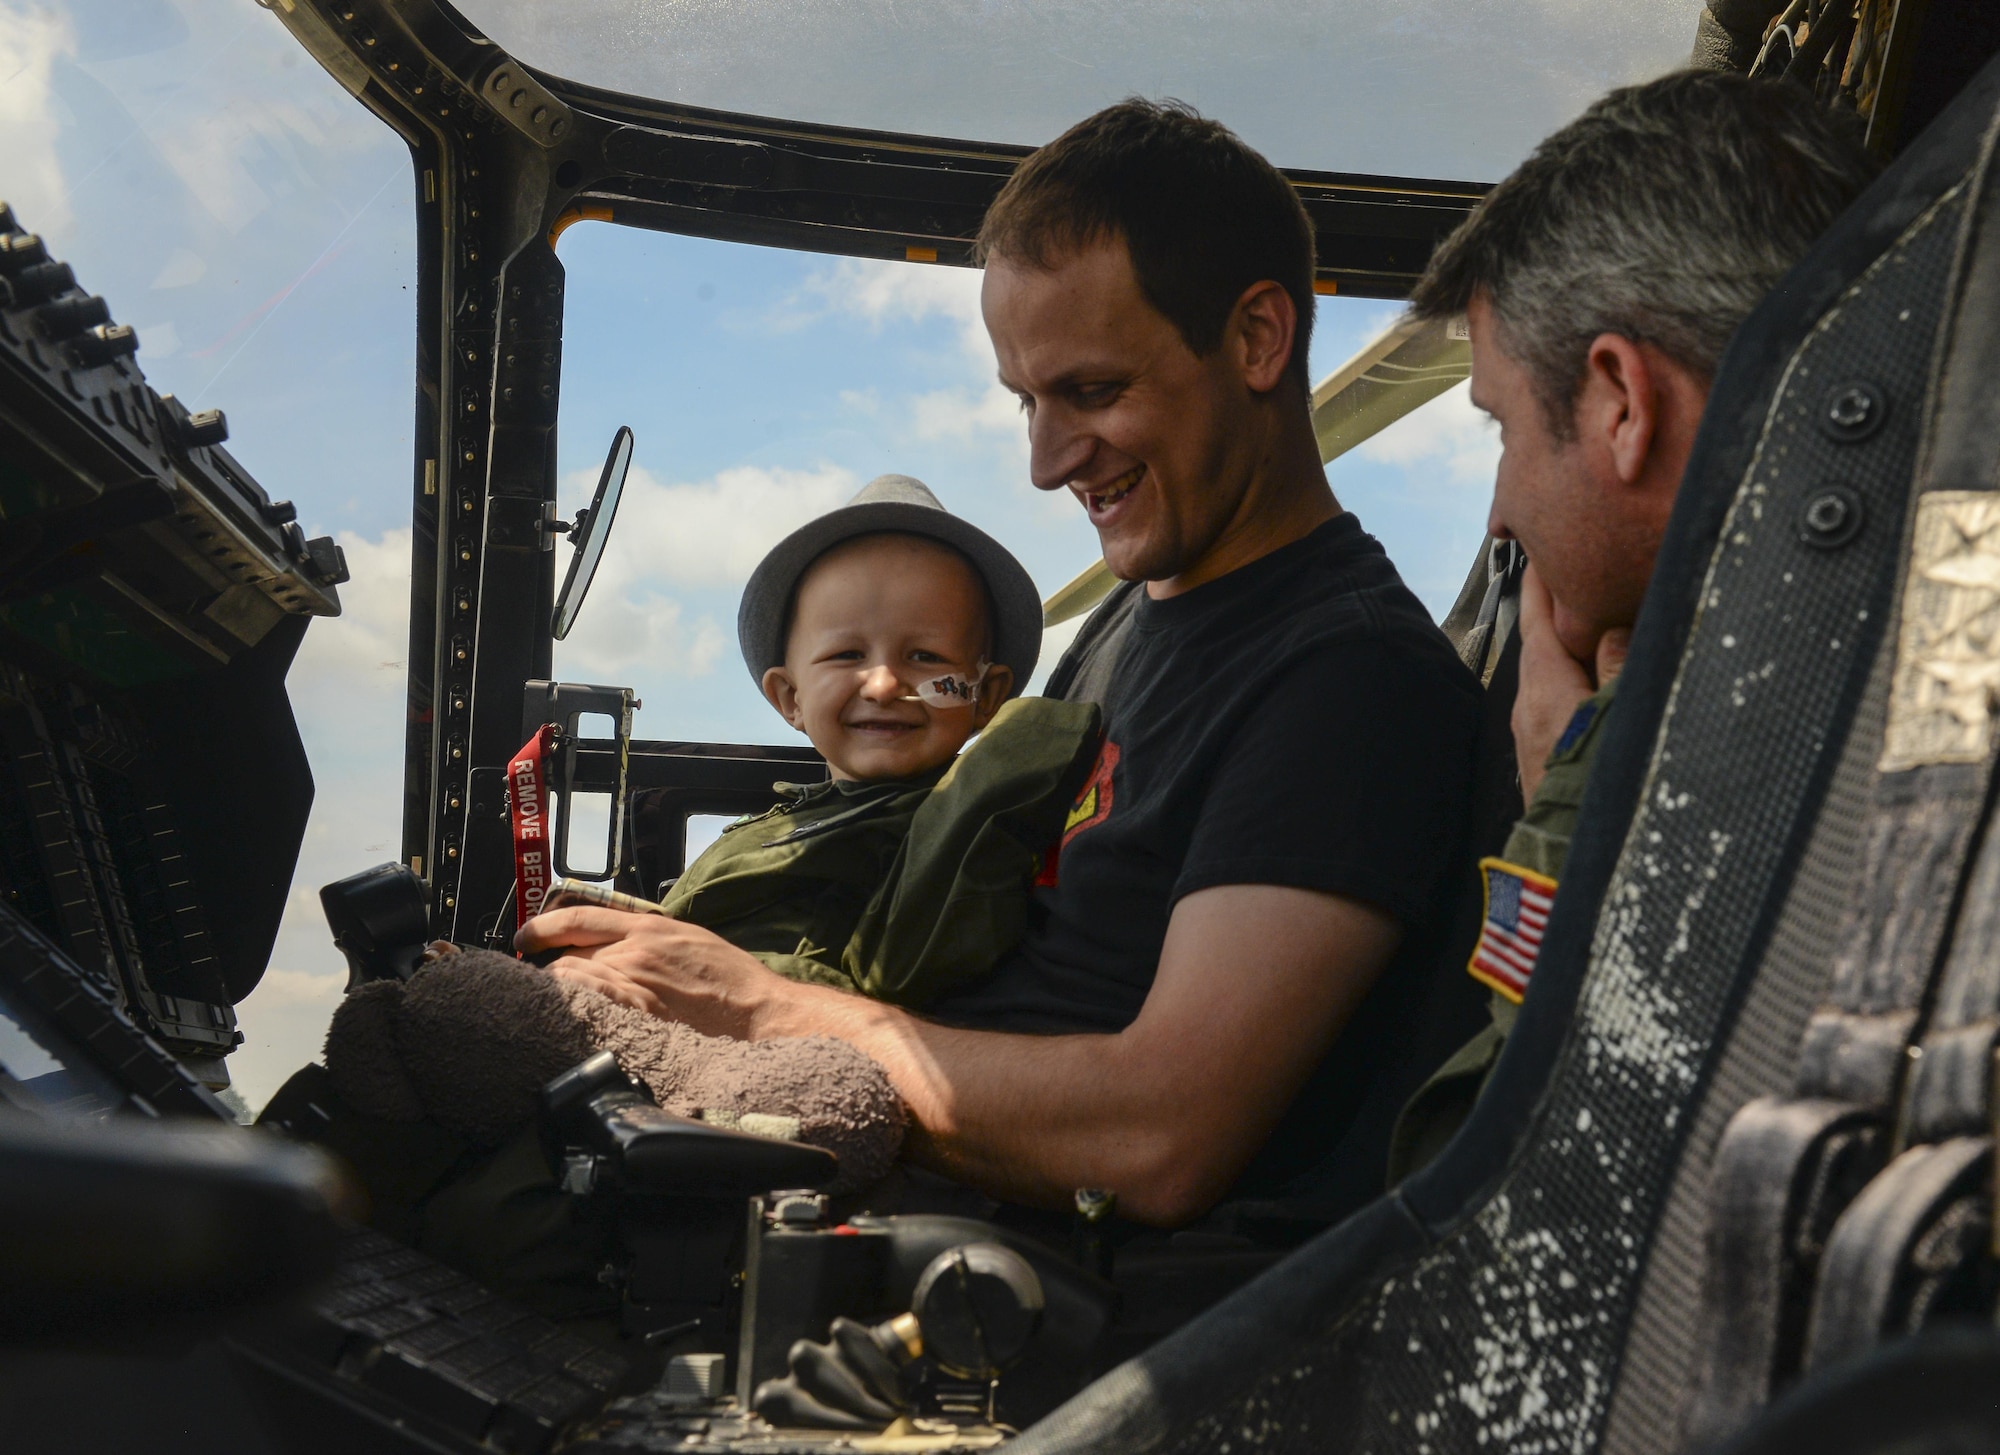 Jay Davidson and his father, Martin, sit in a U.S. Air Force CV-22 Osprey during a Pilot for a Day visit July 7, 2017, on RAF Mildenhall, England. During the visit, Jay and his parents also viewed a KC-135 Stratotanker and an MC-130J Commando II, in addition to a tour of the air traffic control tower. (U.S. Air Force photo by Staff Sgt. Micaiah Anthony)